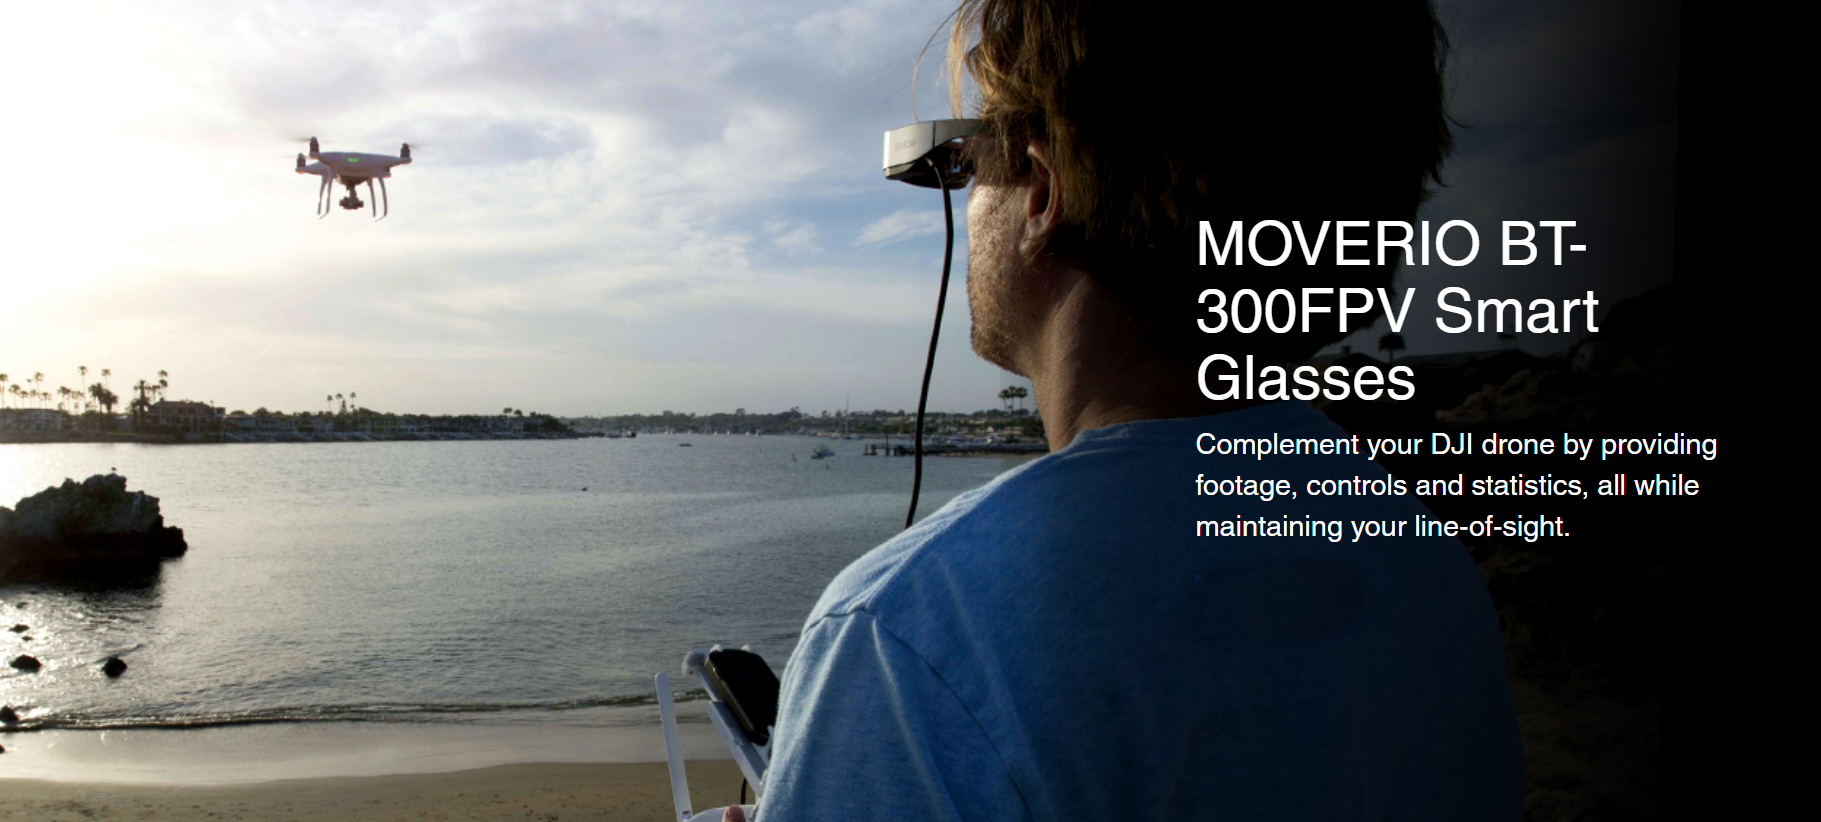 Epson Moverio Bt 300 Fpv Smart Glasses Buy From Camzilla Superior Knowledge And Customer Service